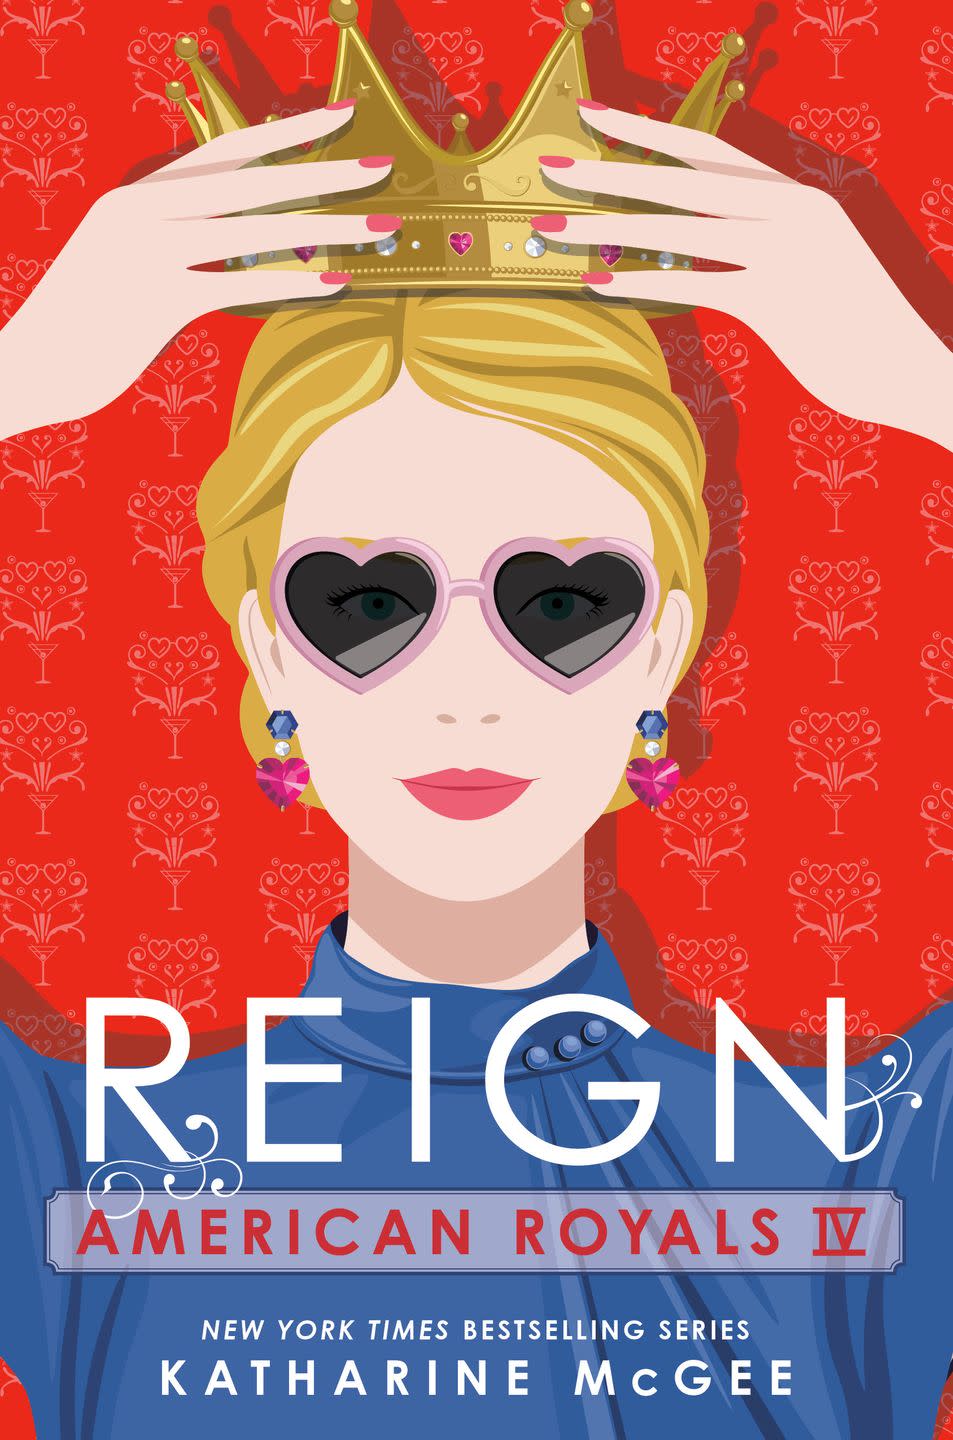 american royals tv reign book cover